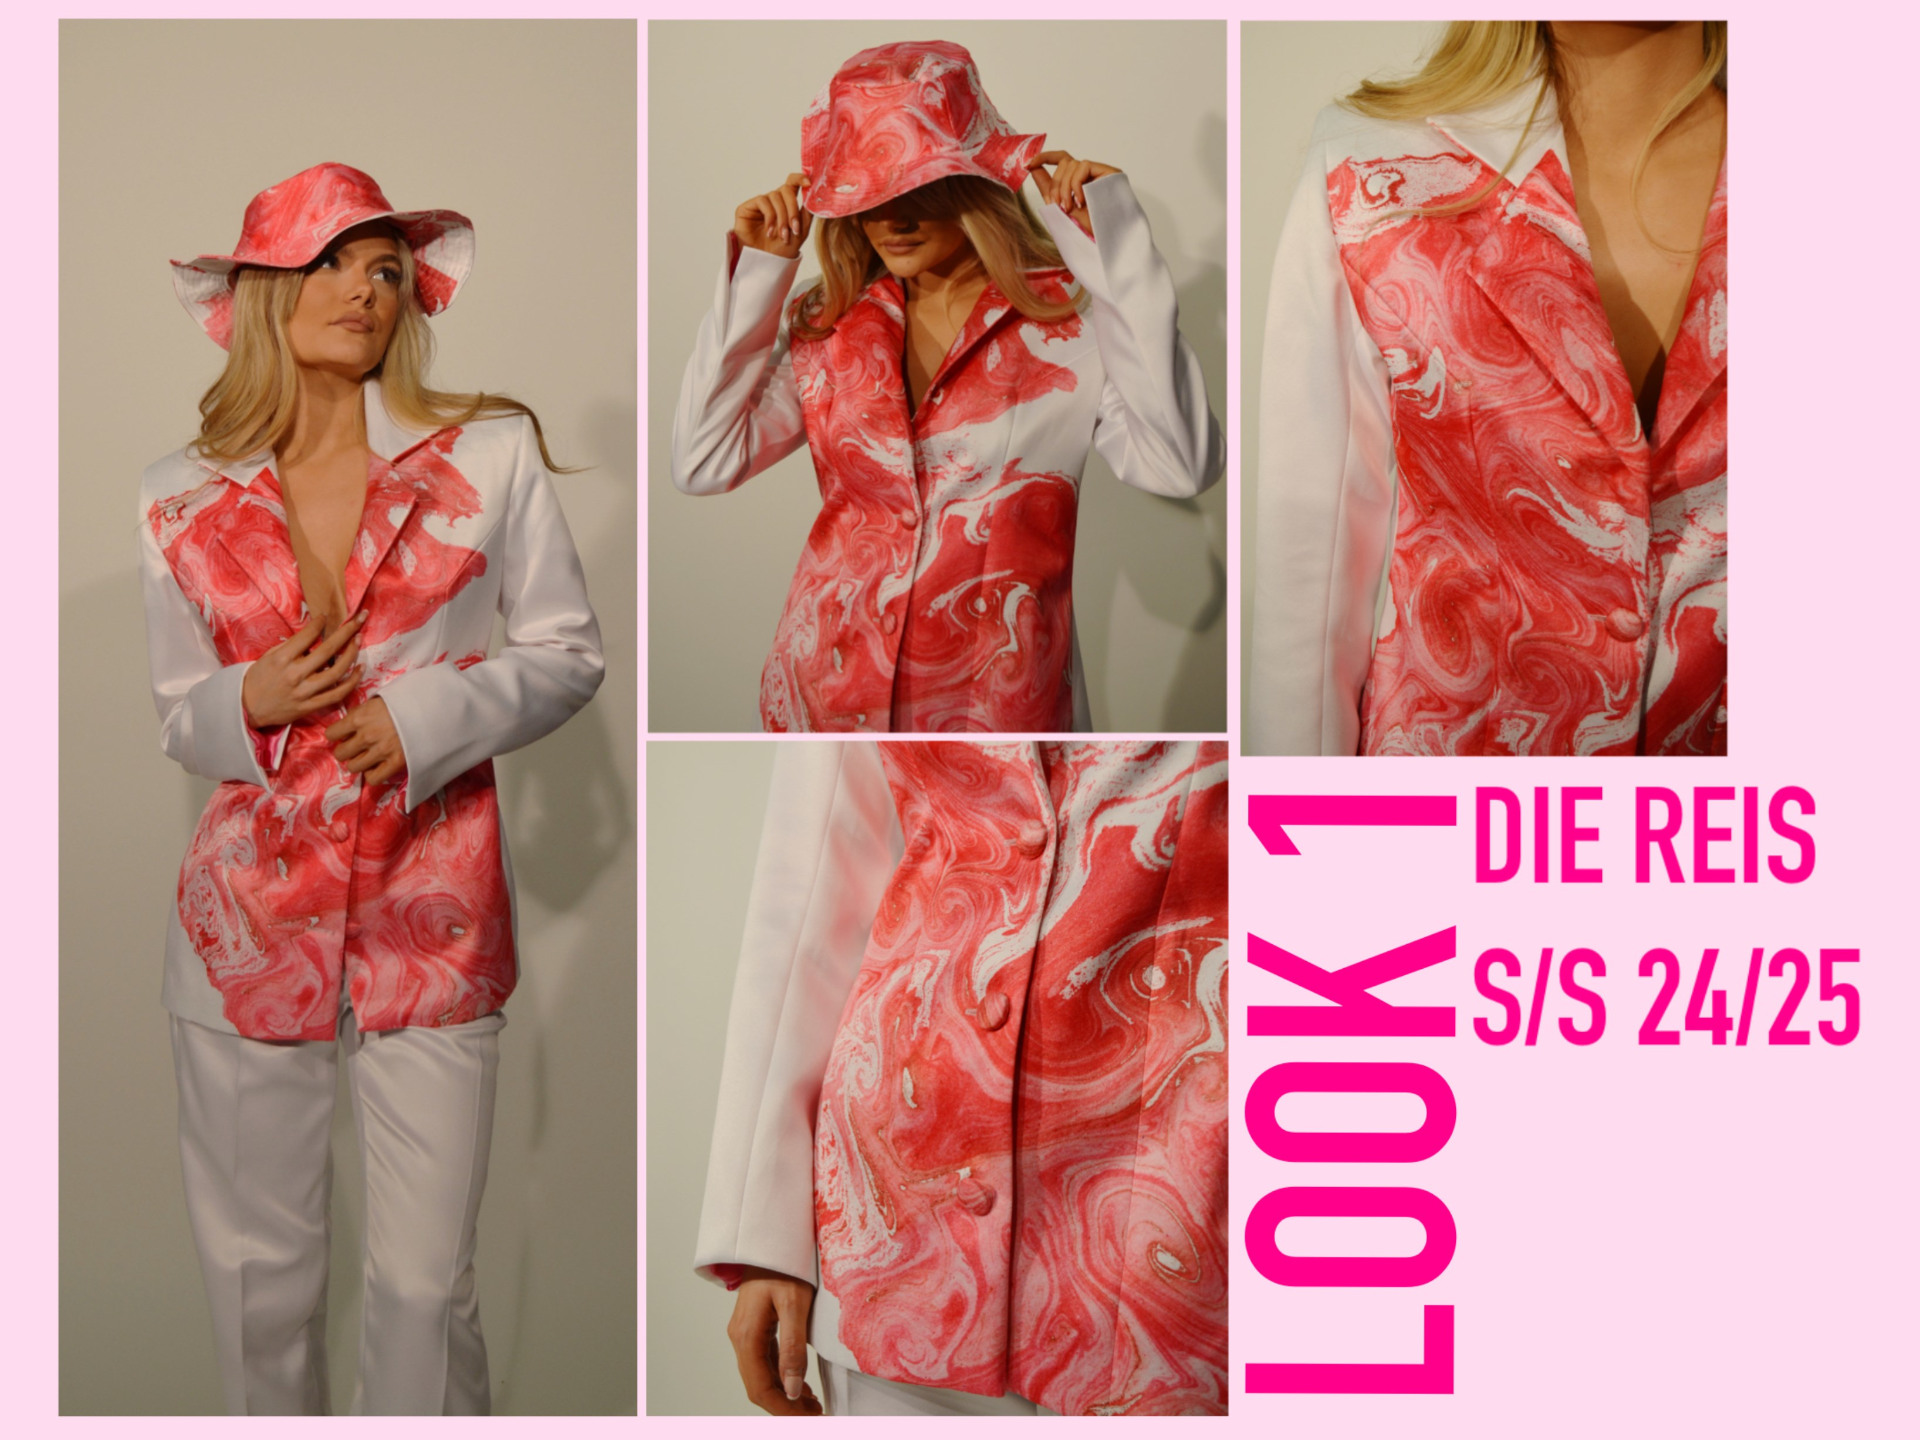 Four photos of female model wearing pink and white hat and top with white trousers